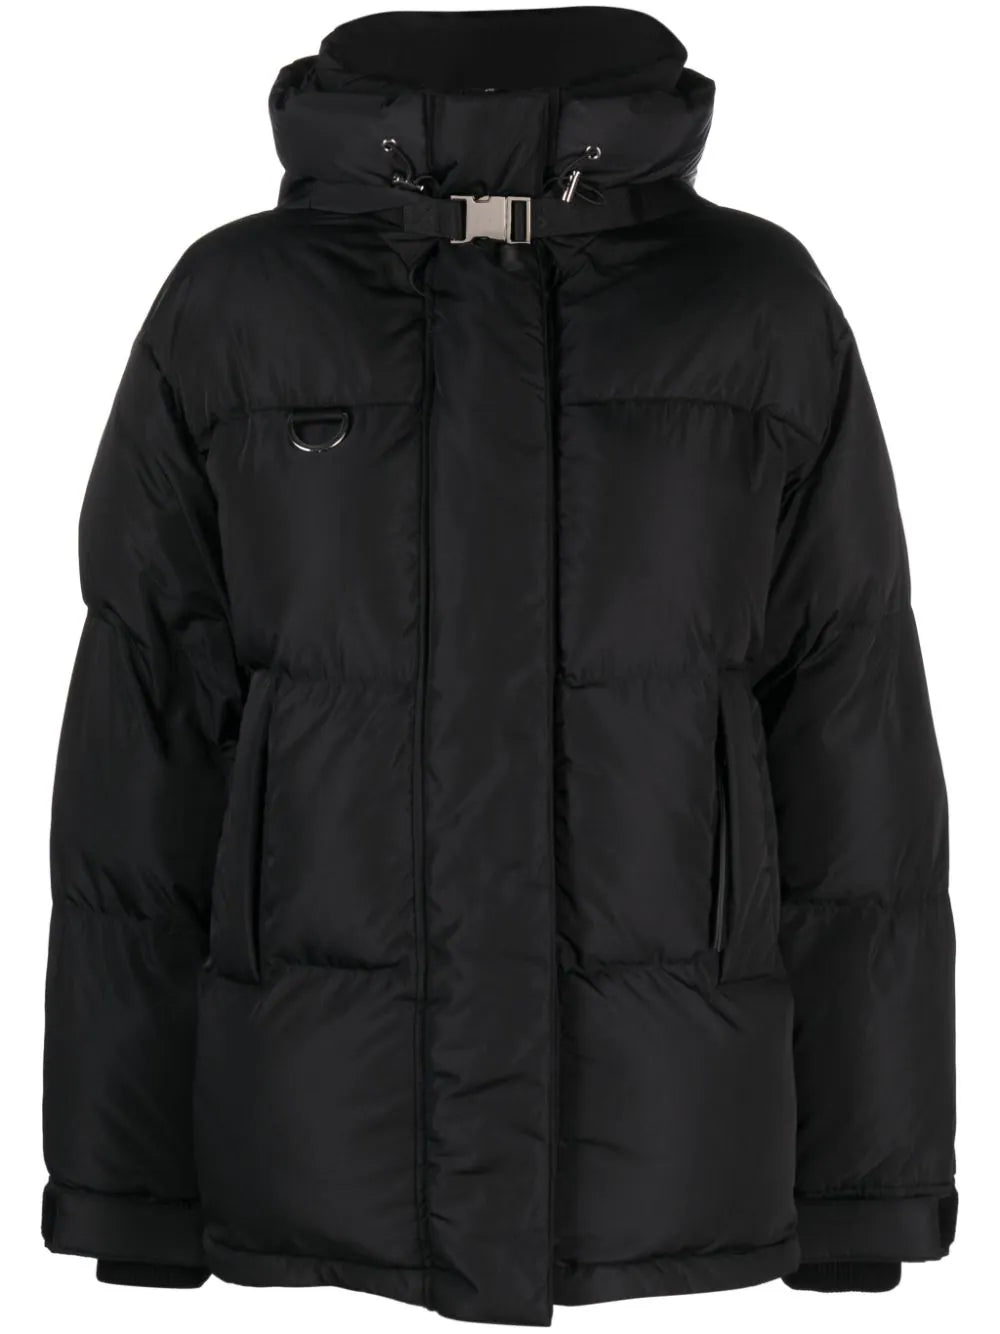 WILLOW IVY PUFFER